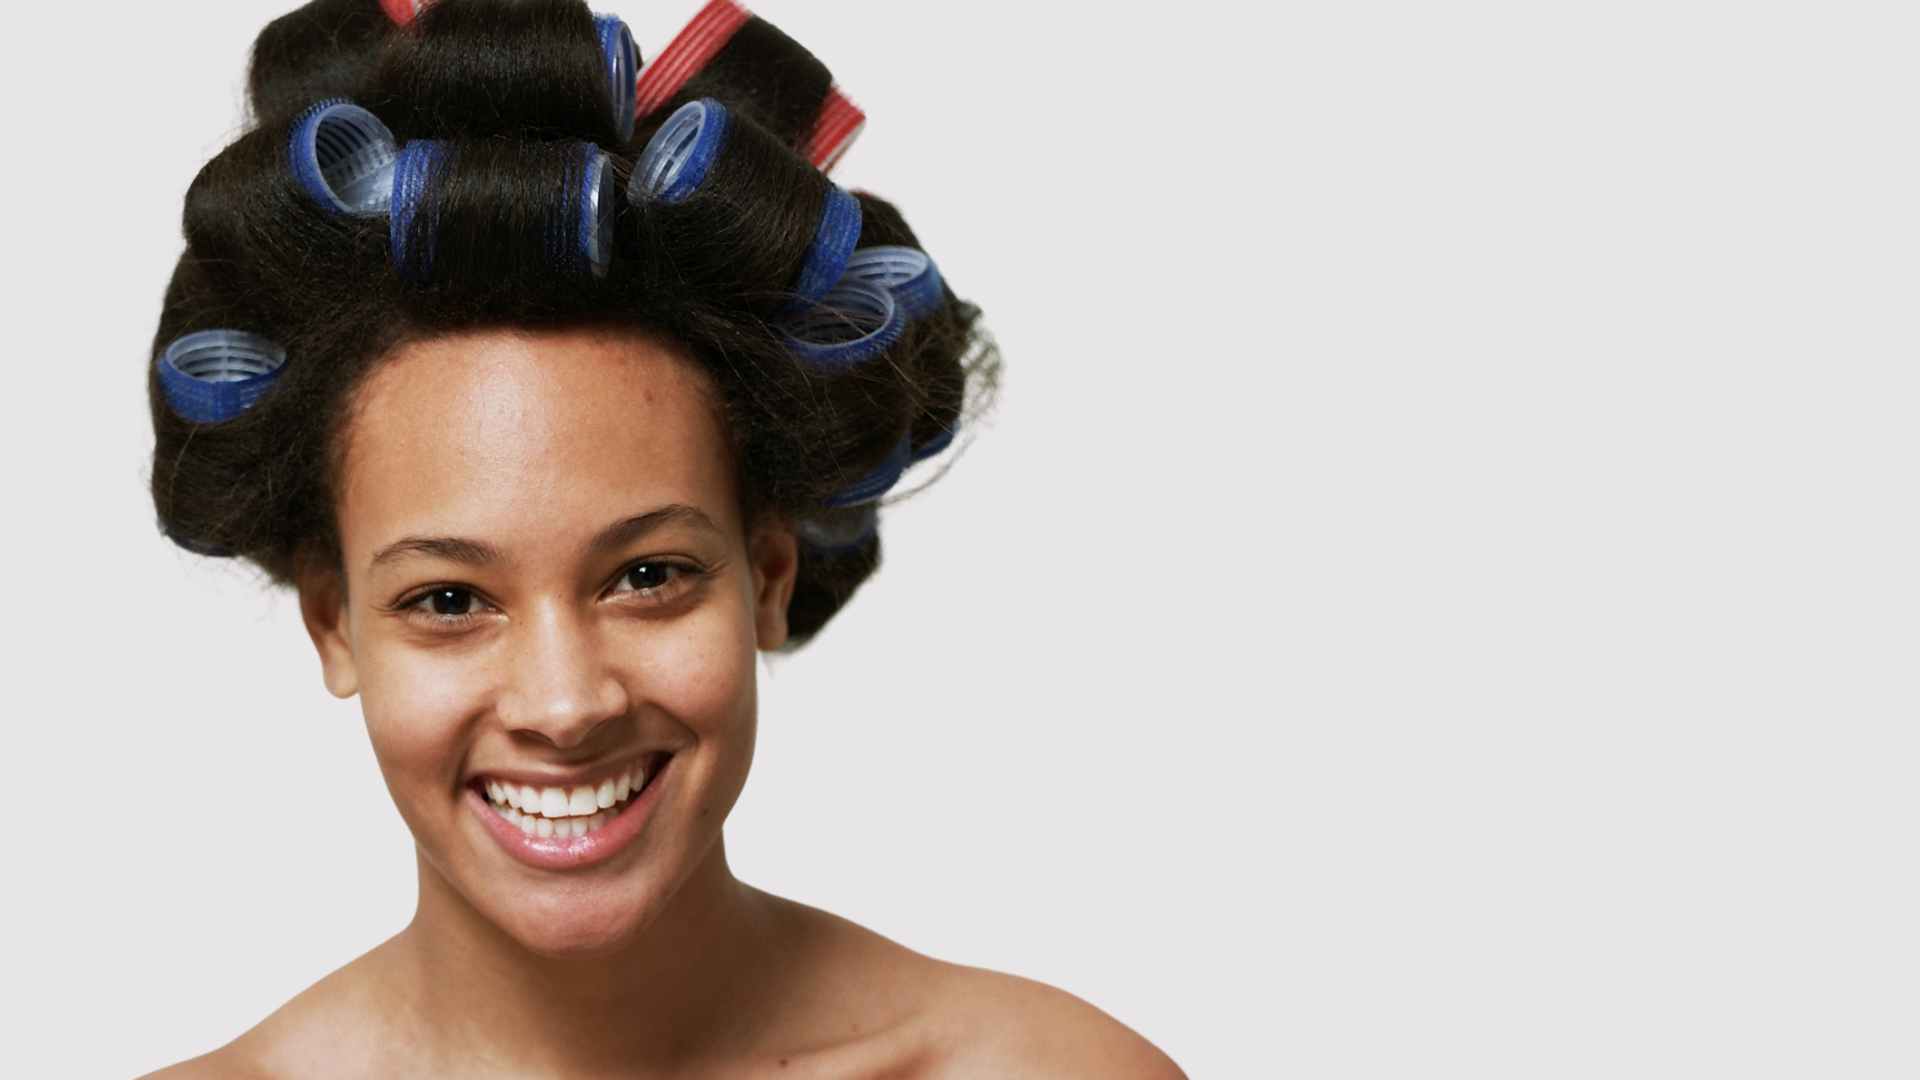 Smiling young woman with velcro rollers in her hair